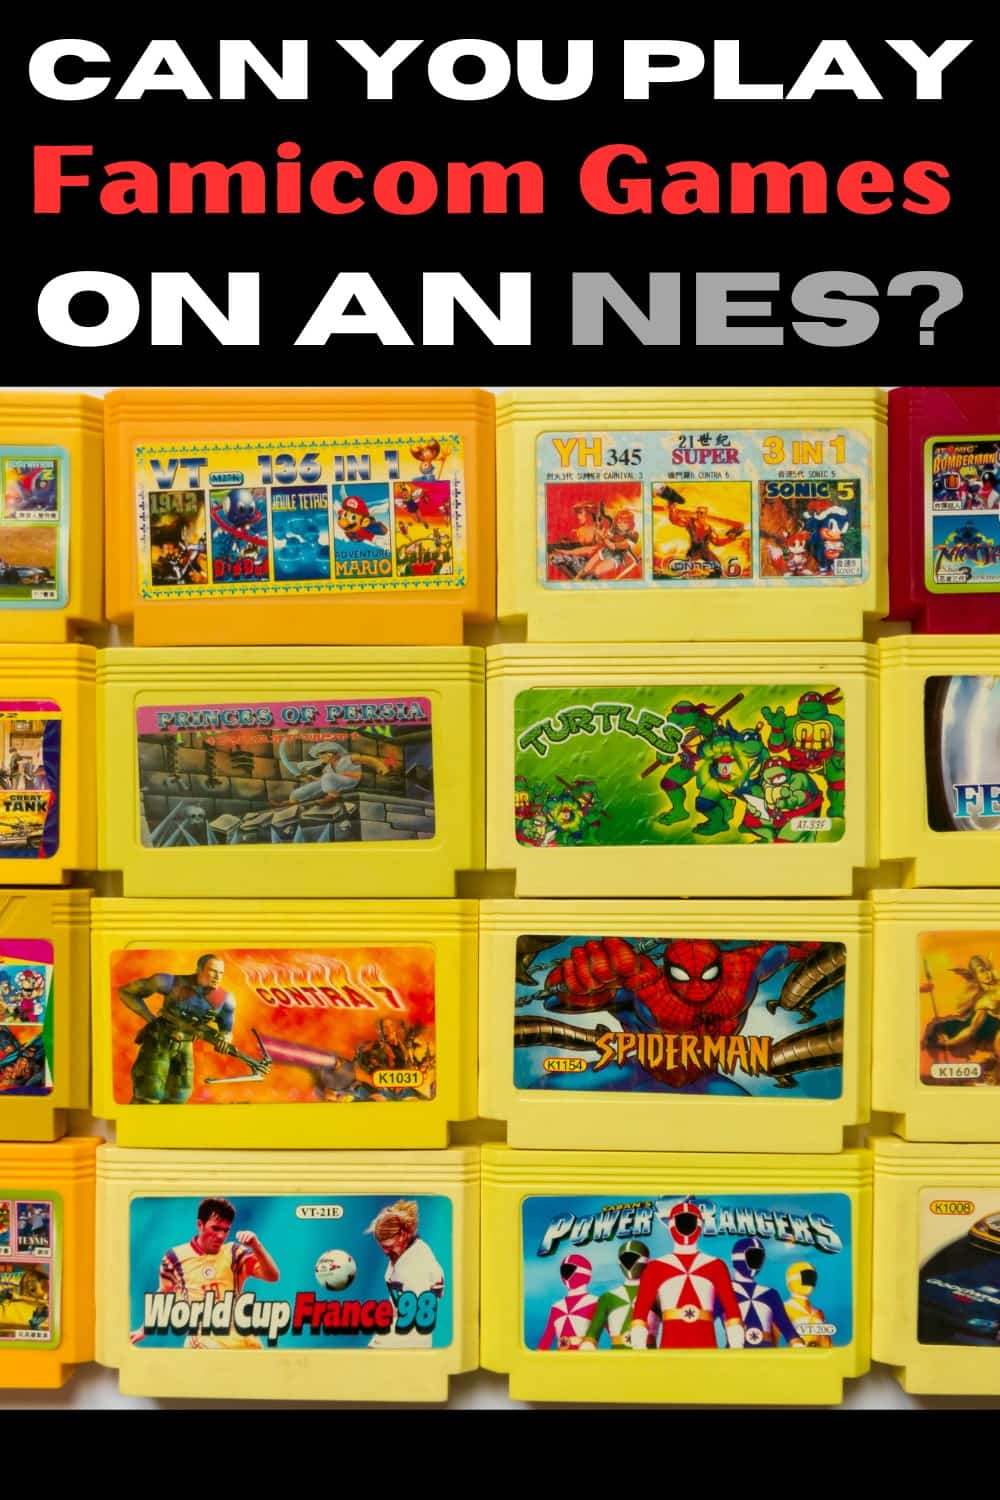 Yes. You can play Famicom Games on an NES